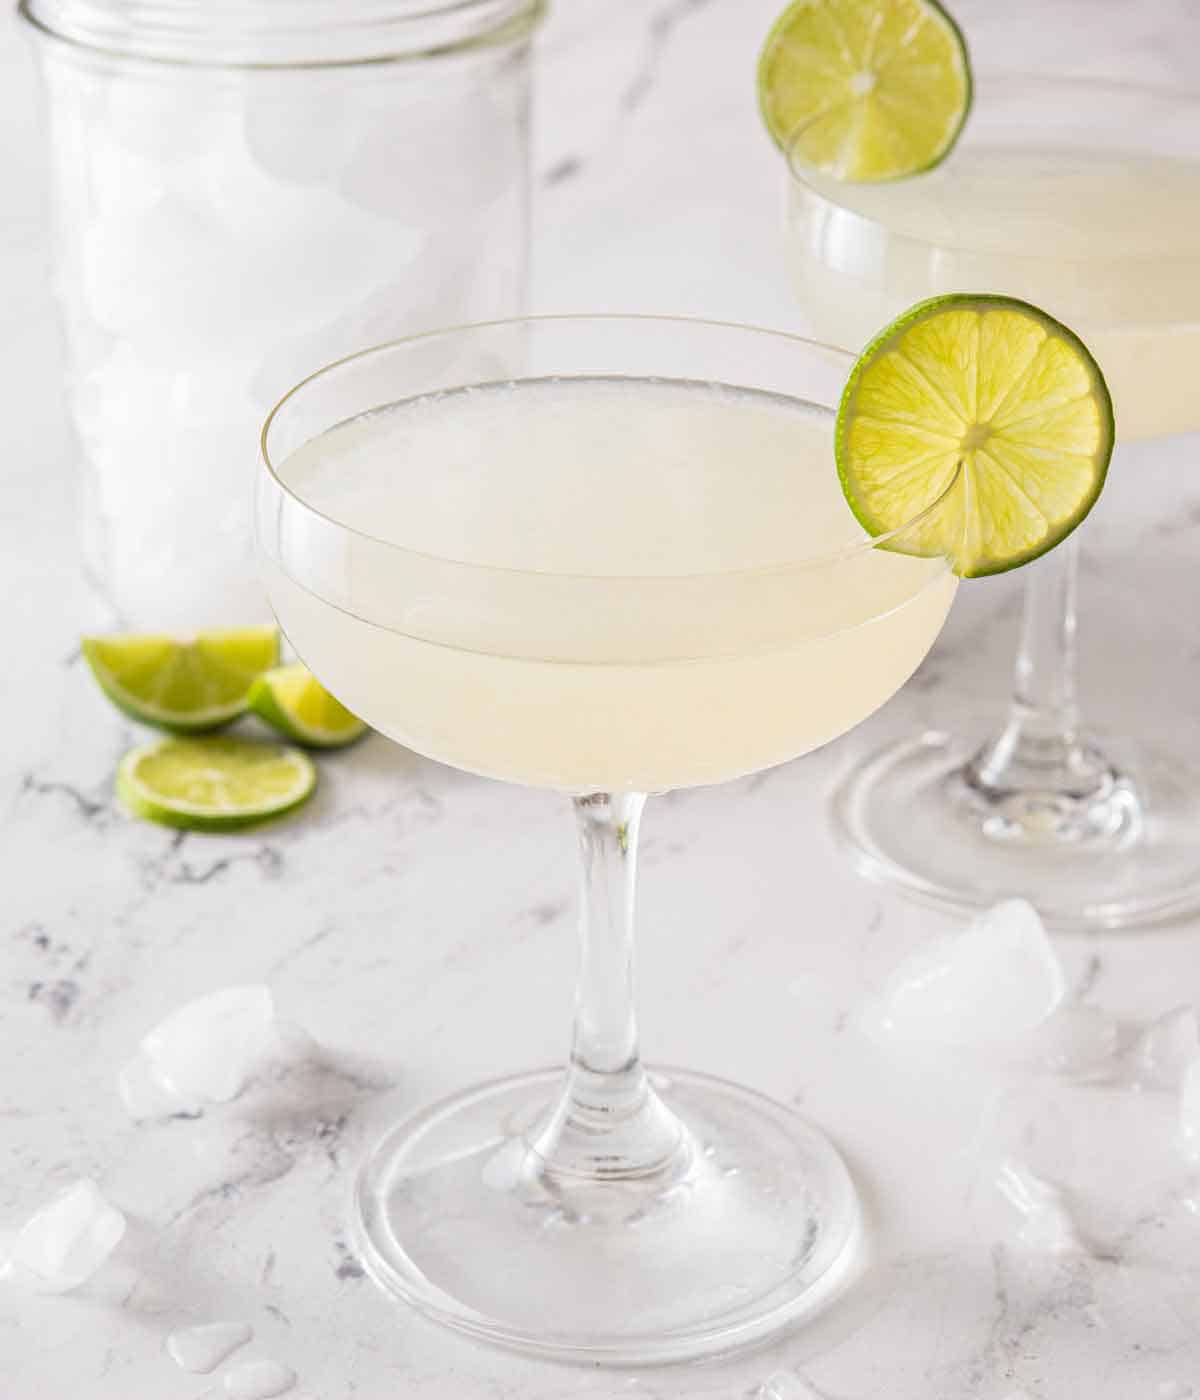 Two gimlet with one pulled front and center with a container of ice and more limes in the back.